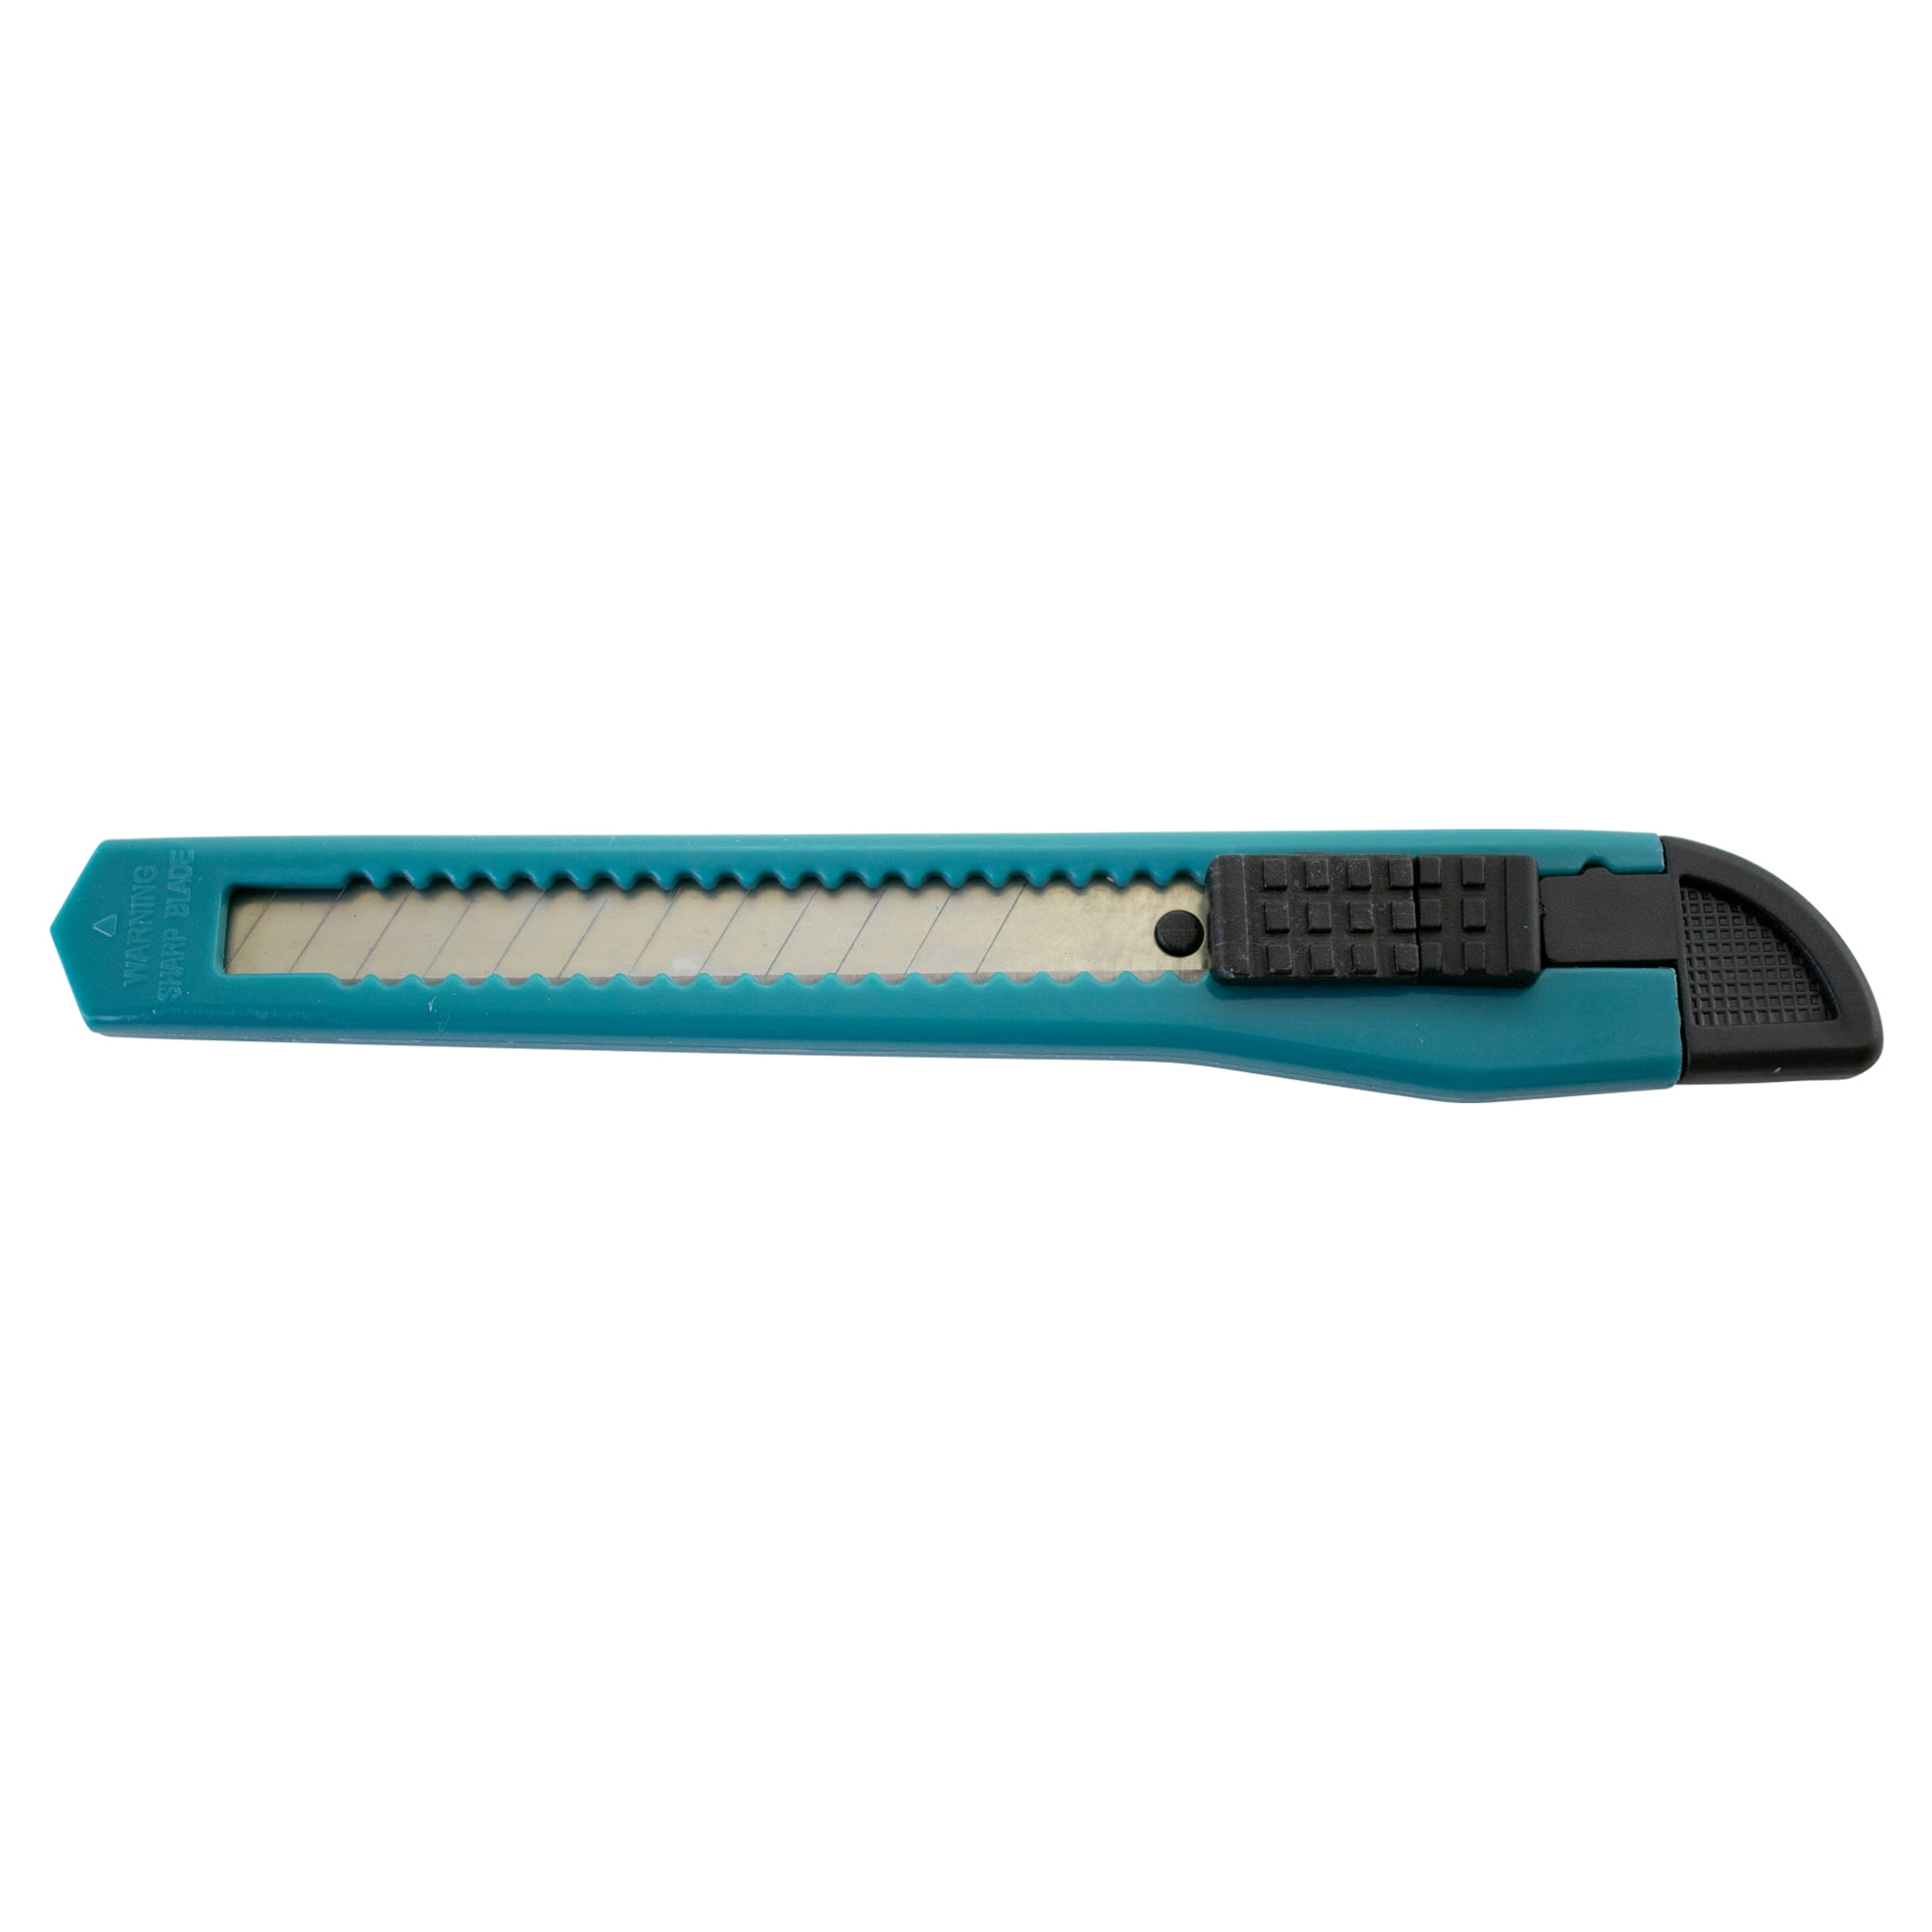 Box Cutter Retractable Lock Razor Utility Knife with 5 Sharp